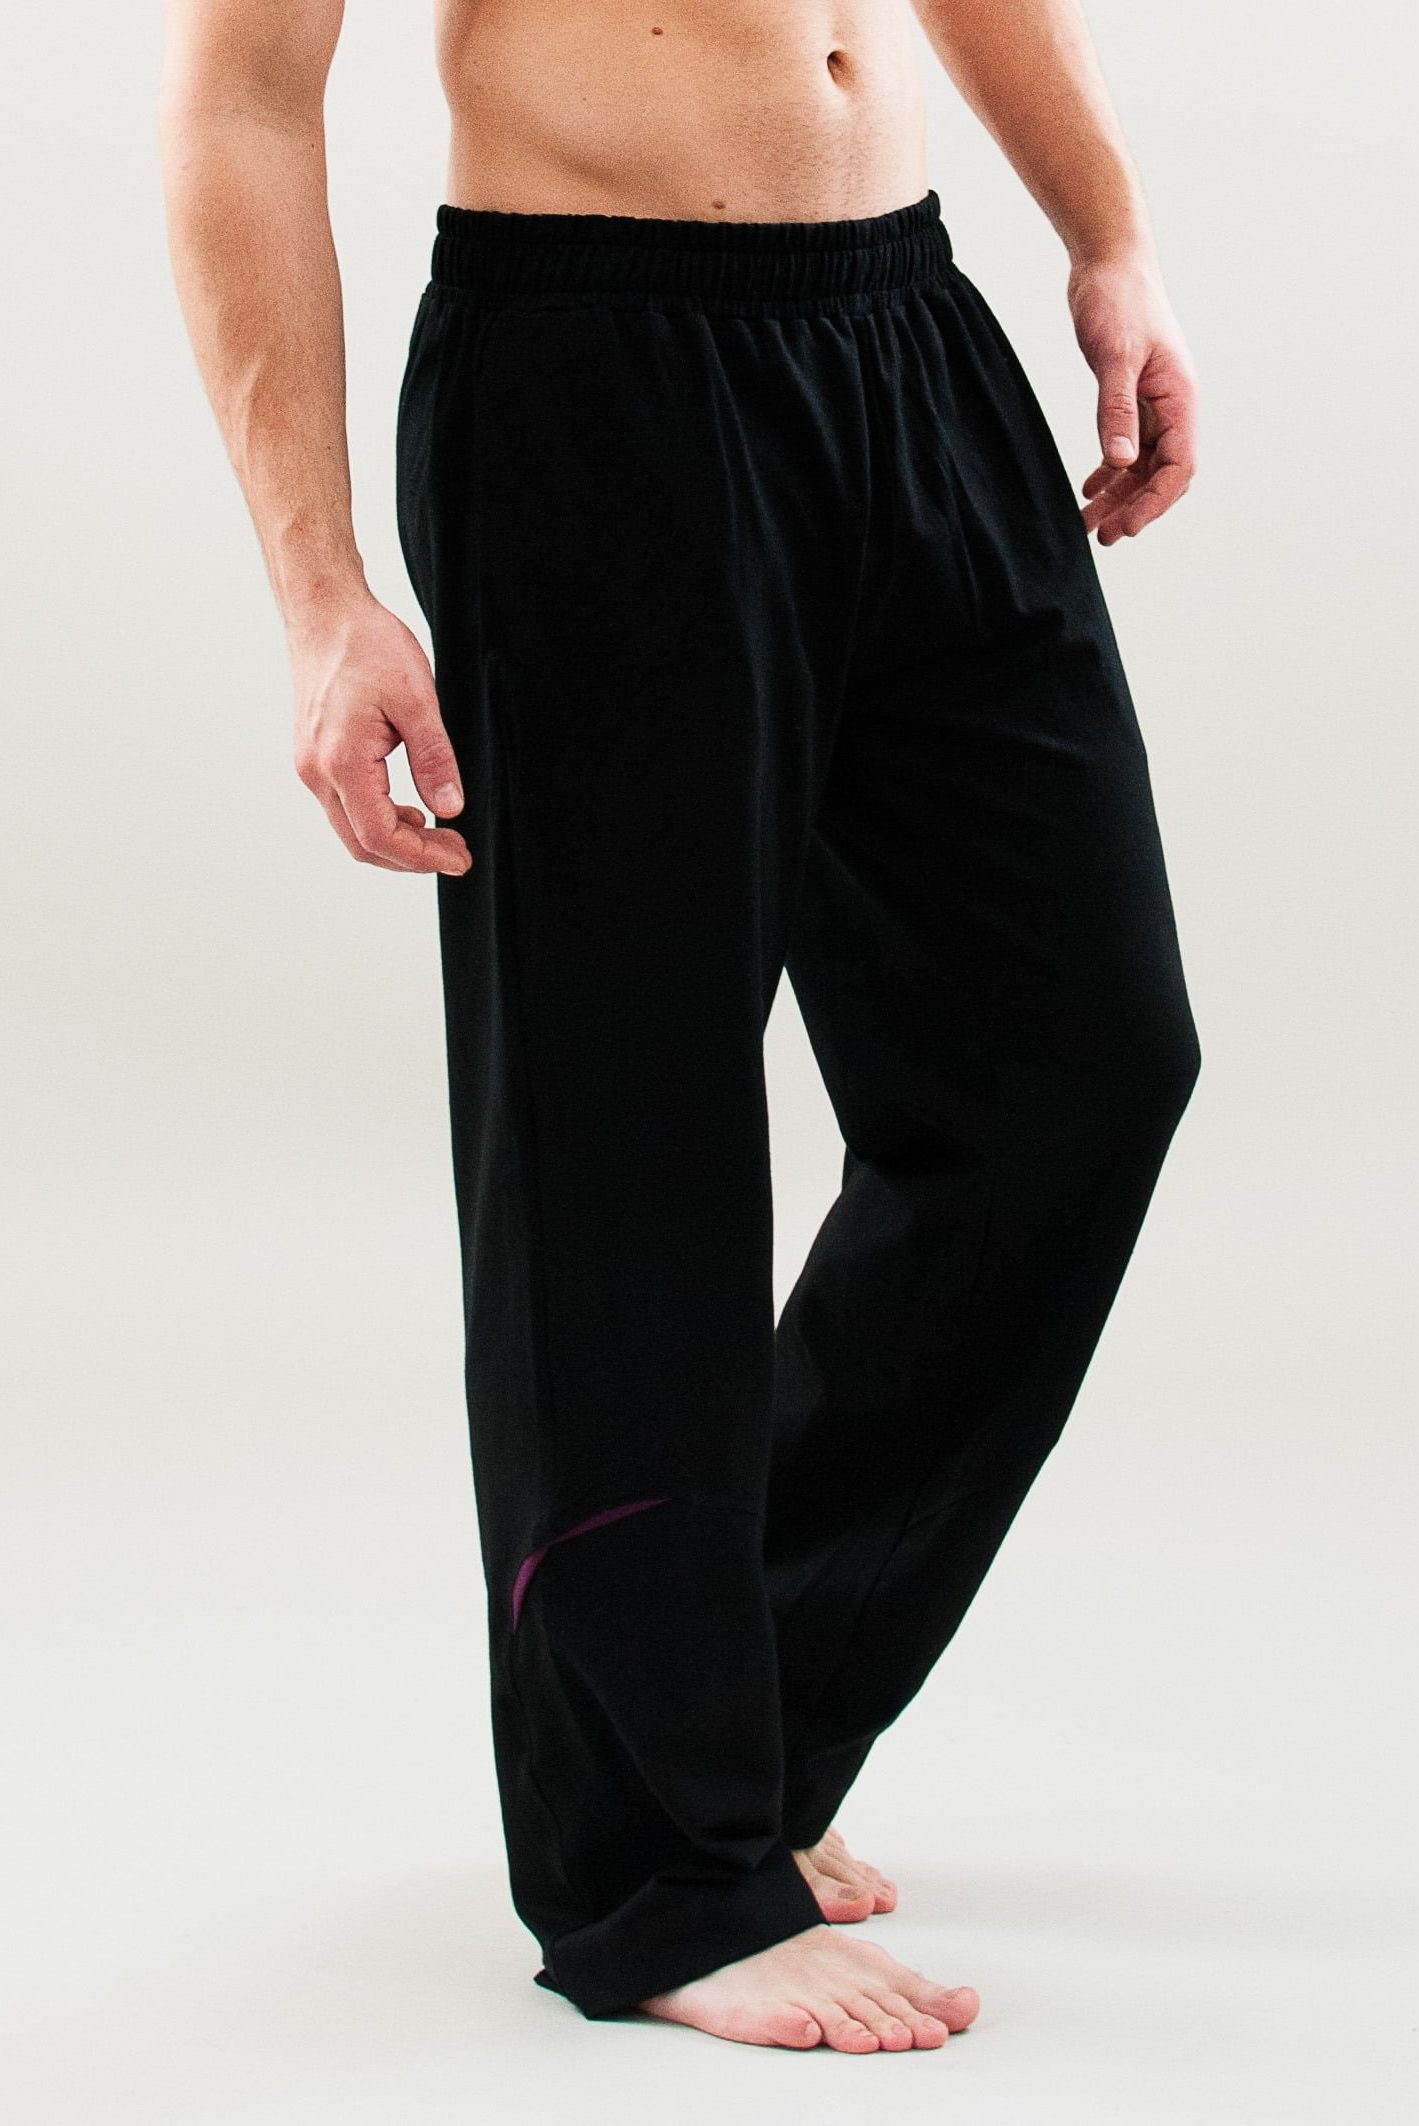 Practice Yoga Pants For Men - Black, Loose Fit With Pockets